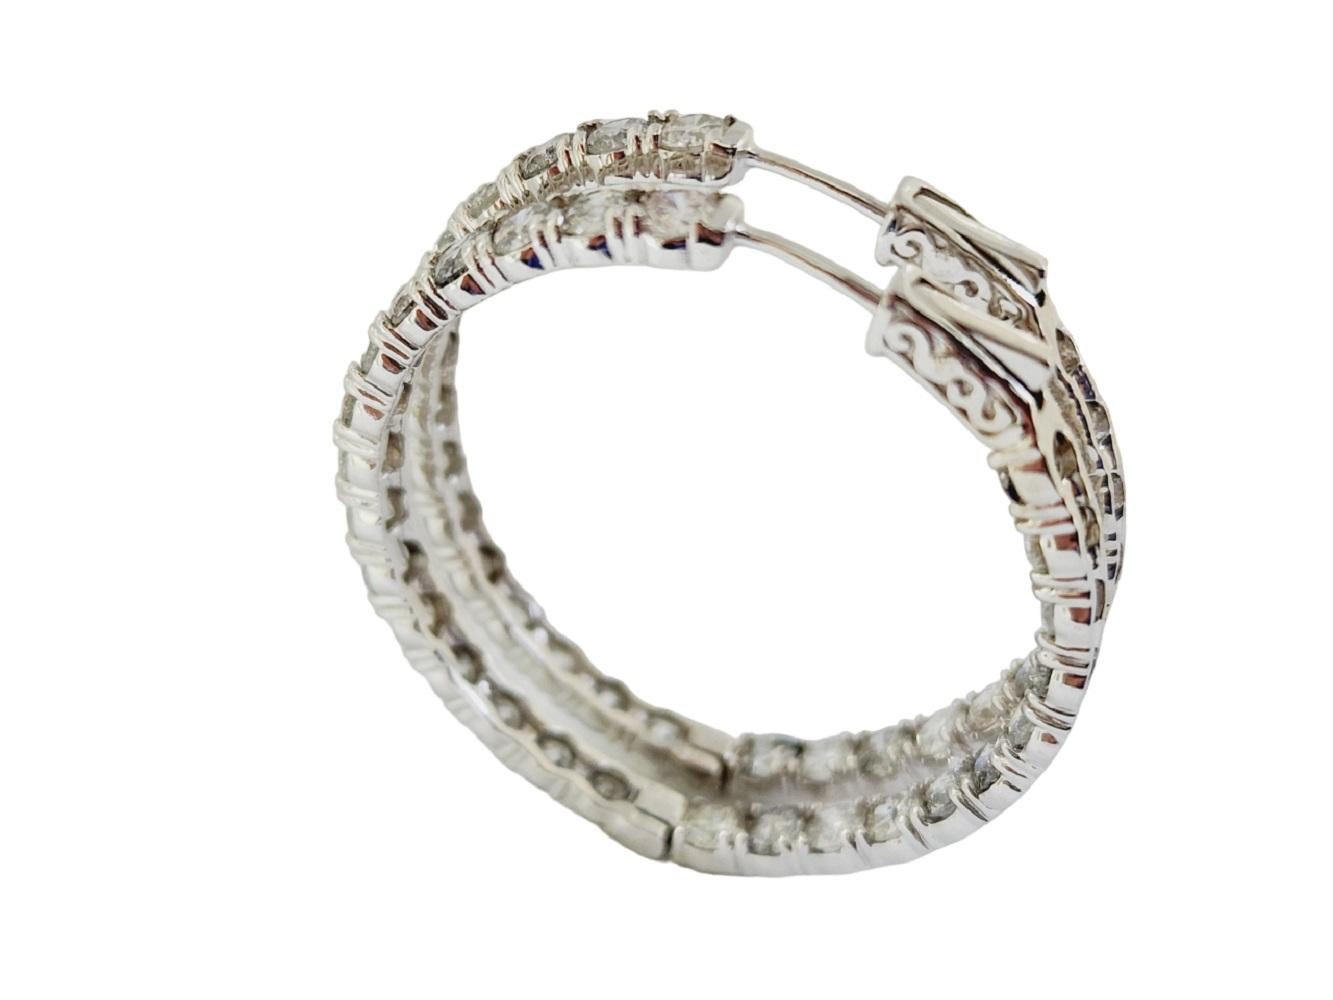 Beautiful pair of natural diamond inside out hoop earrings in 14K white gold. Secures with snap closure for wear. Average Color H, Clarity I, Measures 1 inch x 1 inch diameter. 